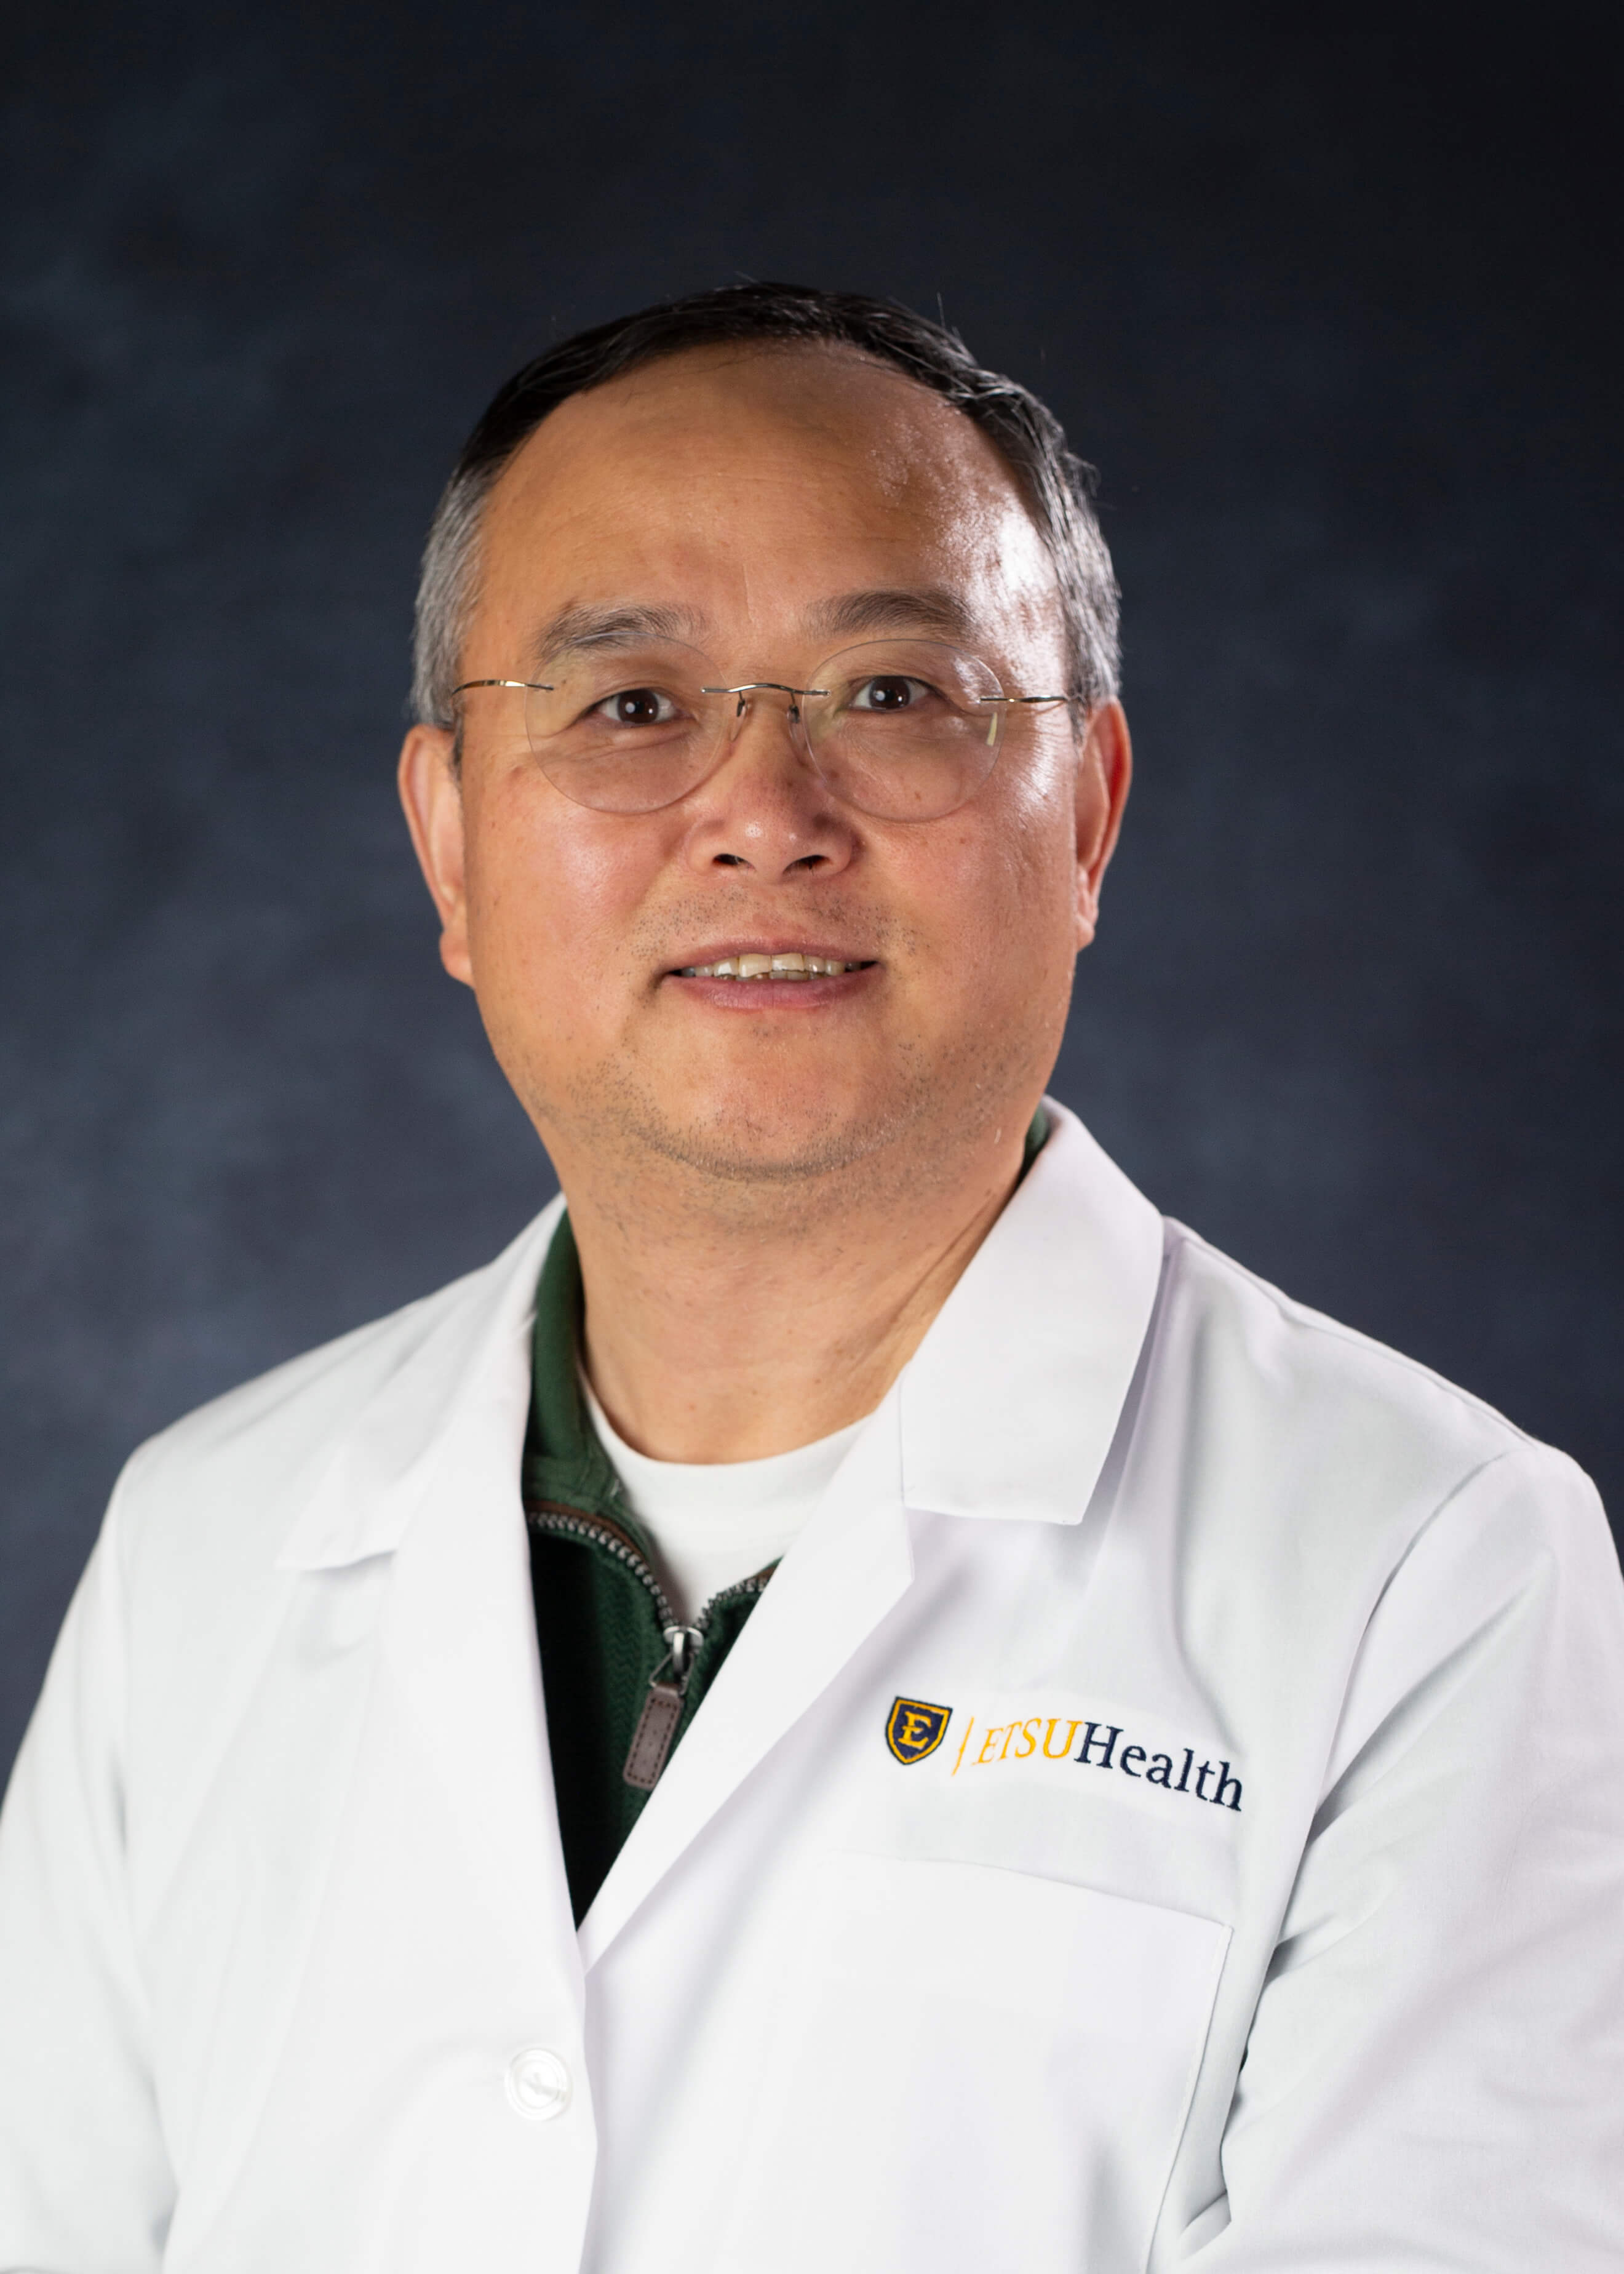 Photo of Zhi Qiang Yao, MD, PhD Division Chief, Research